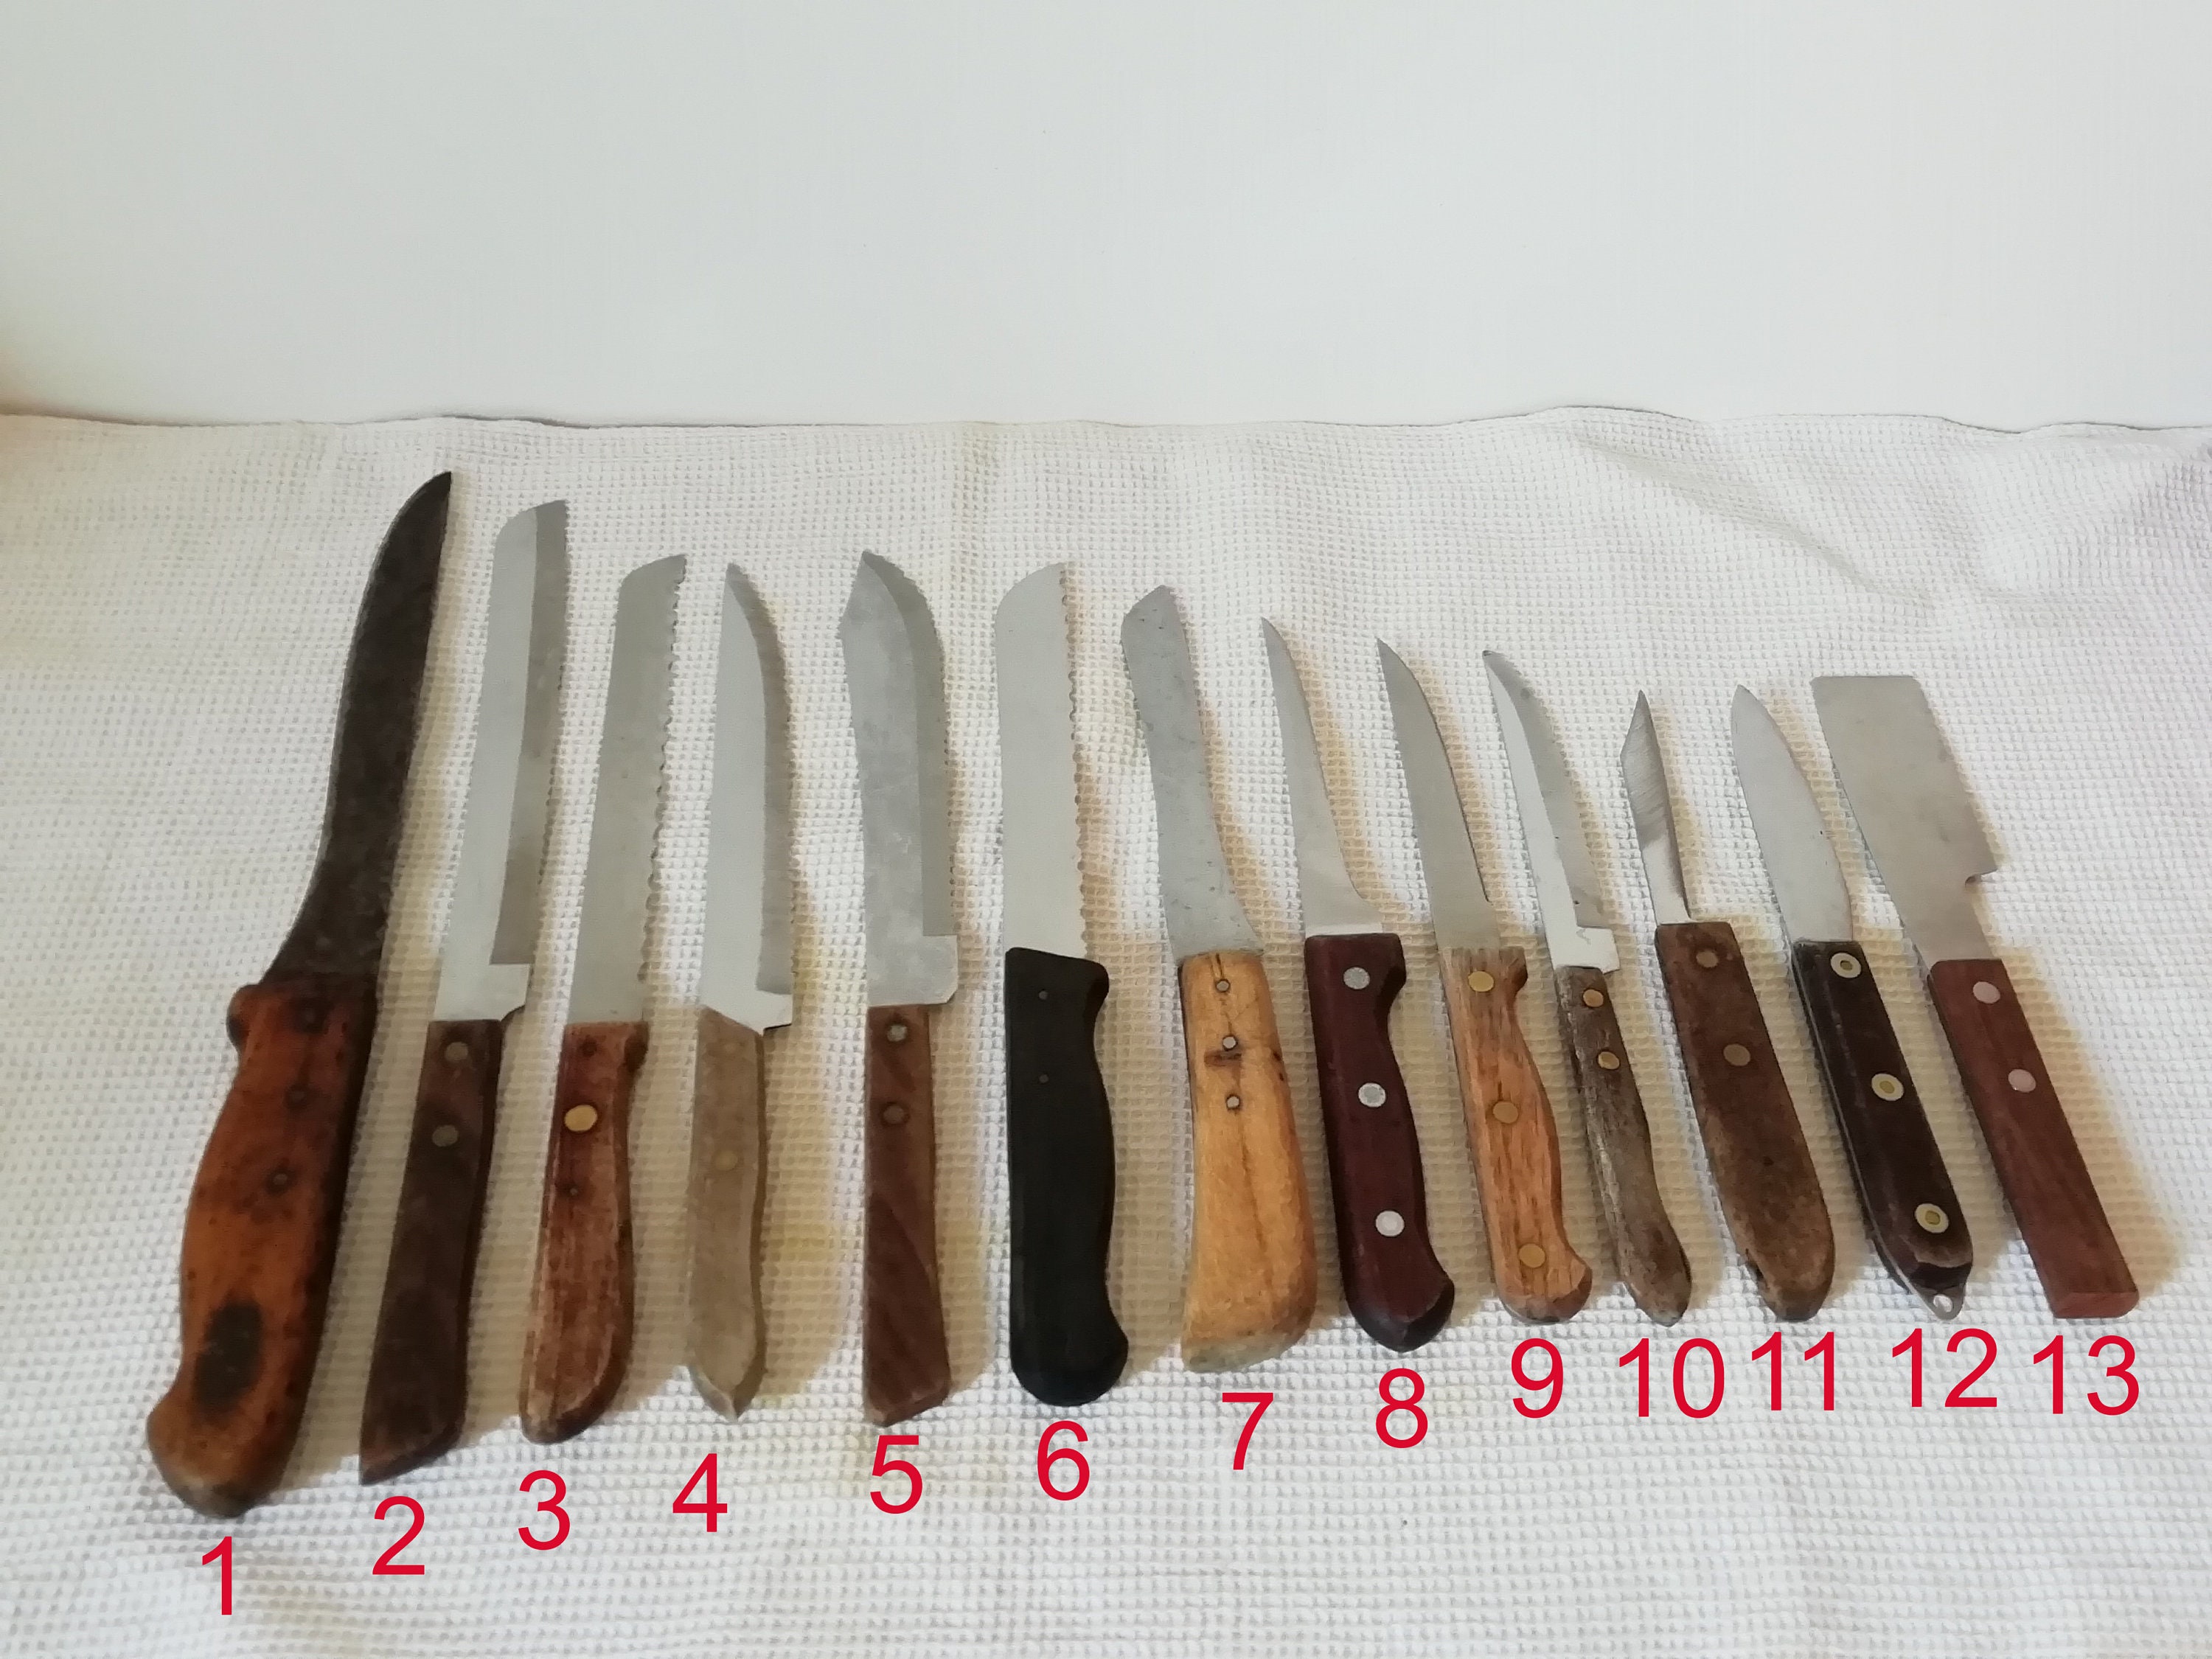 Sold at Auction: 7 Pcs. Wild West Knife Collection